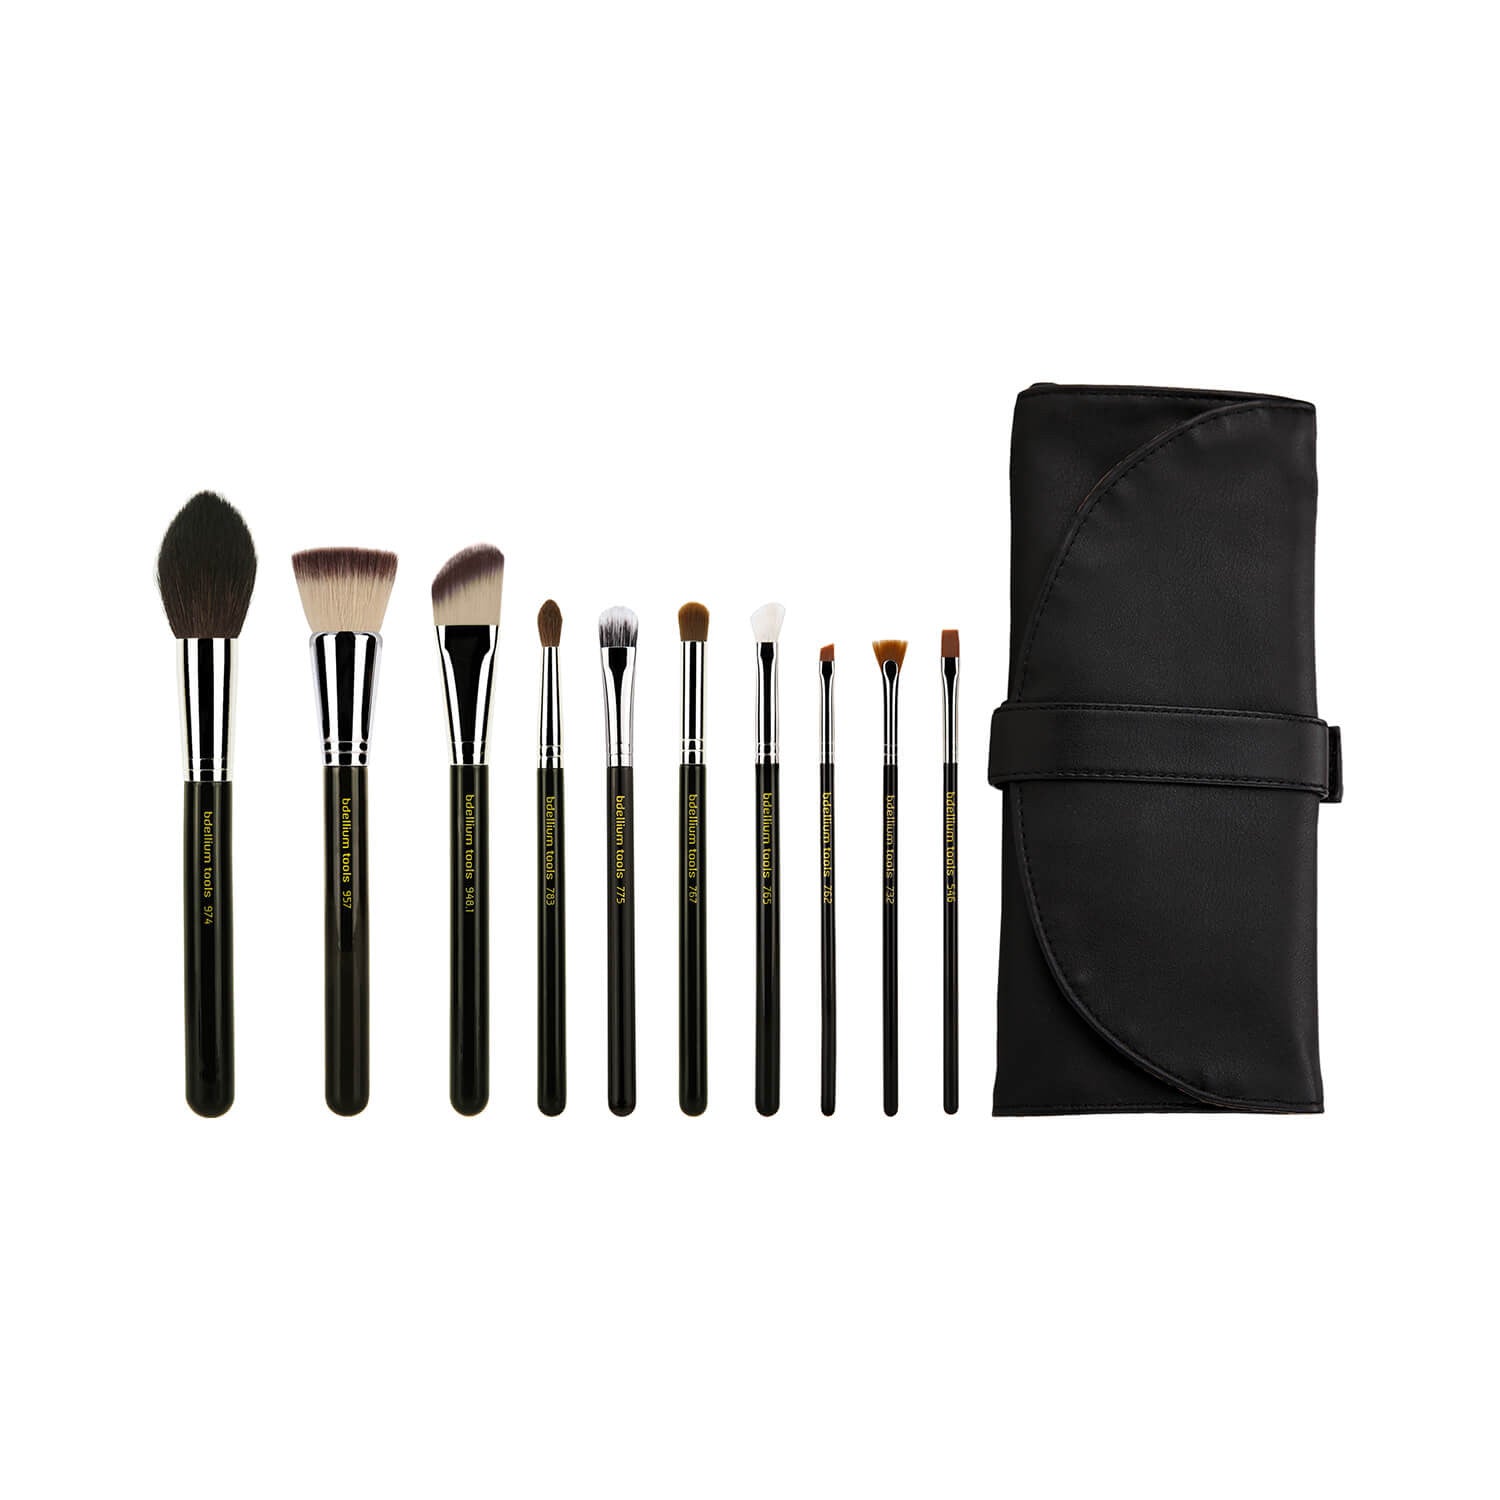 BDellium Tools Maestro The Key Essential 10pc. Brush set with Roll-up Pouch